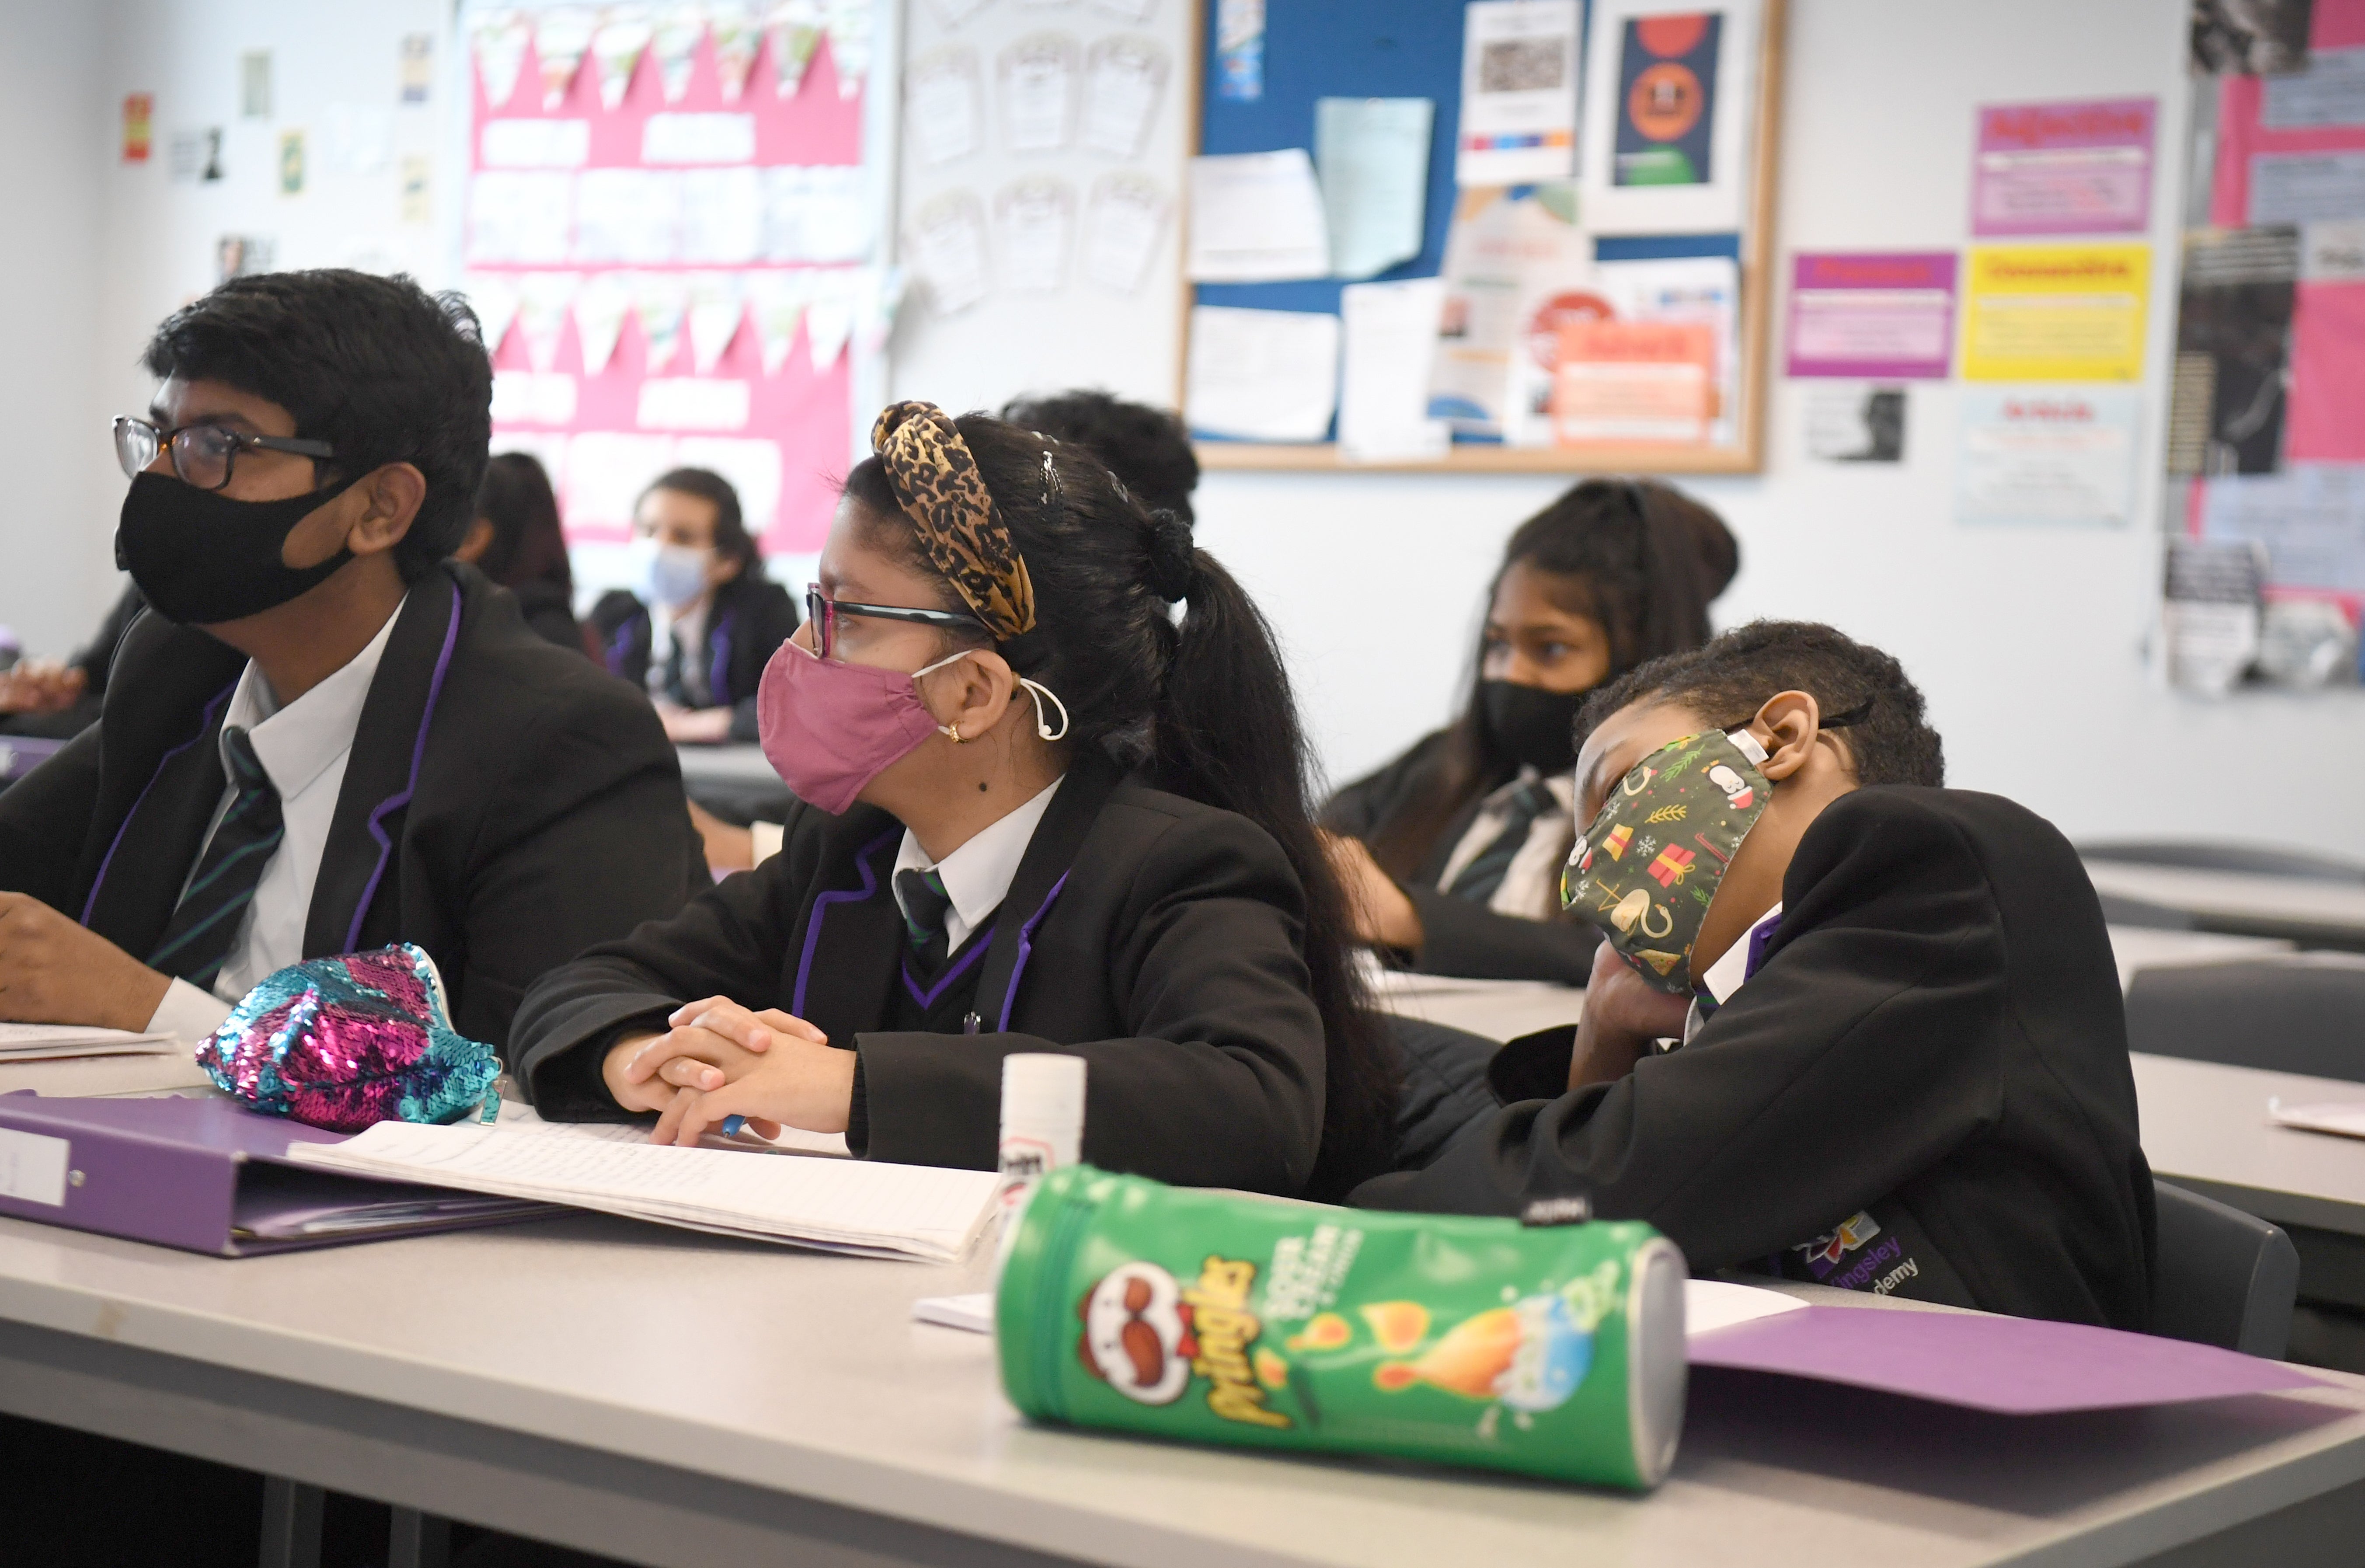 Secondary school students will be asked to wear masks in classrooms to help limit Covid spread